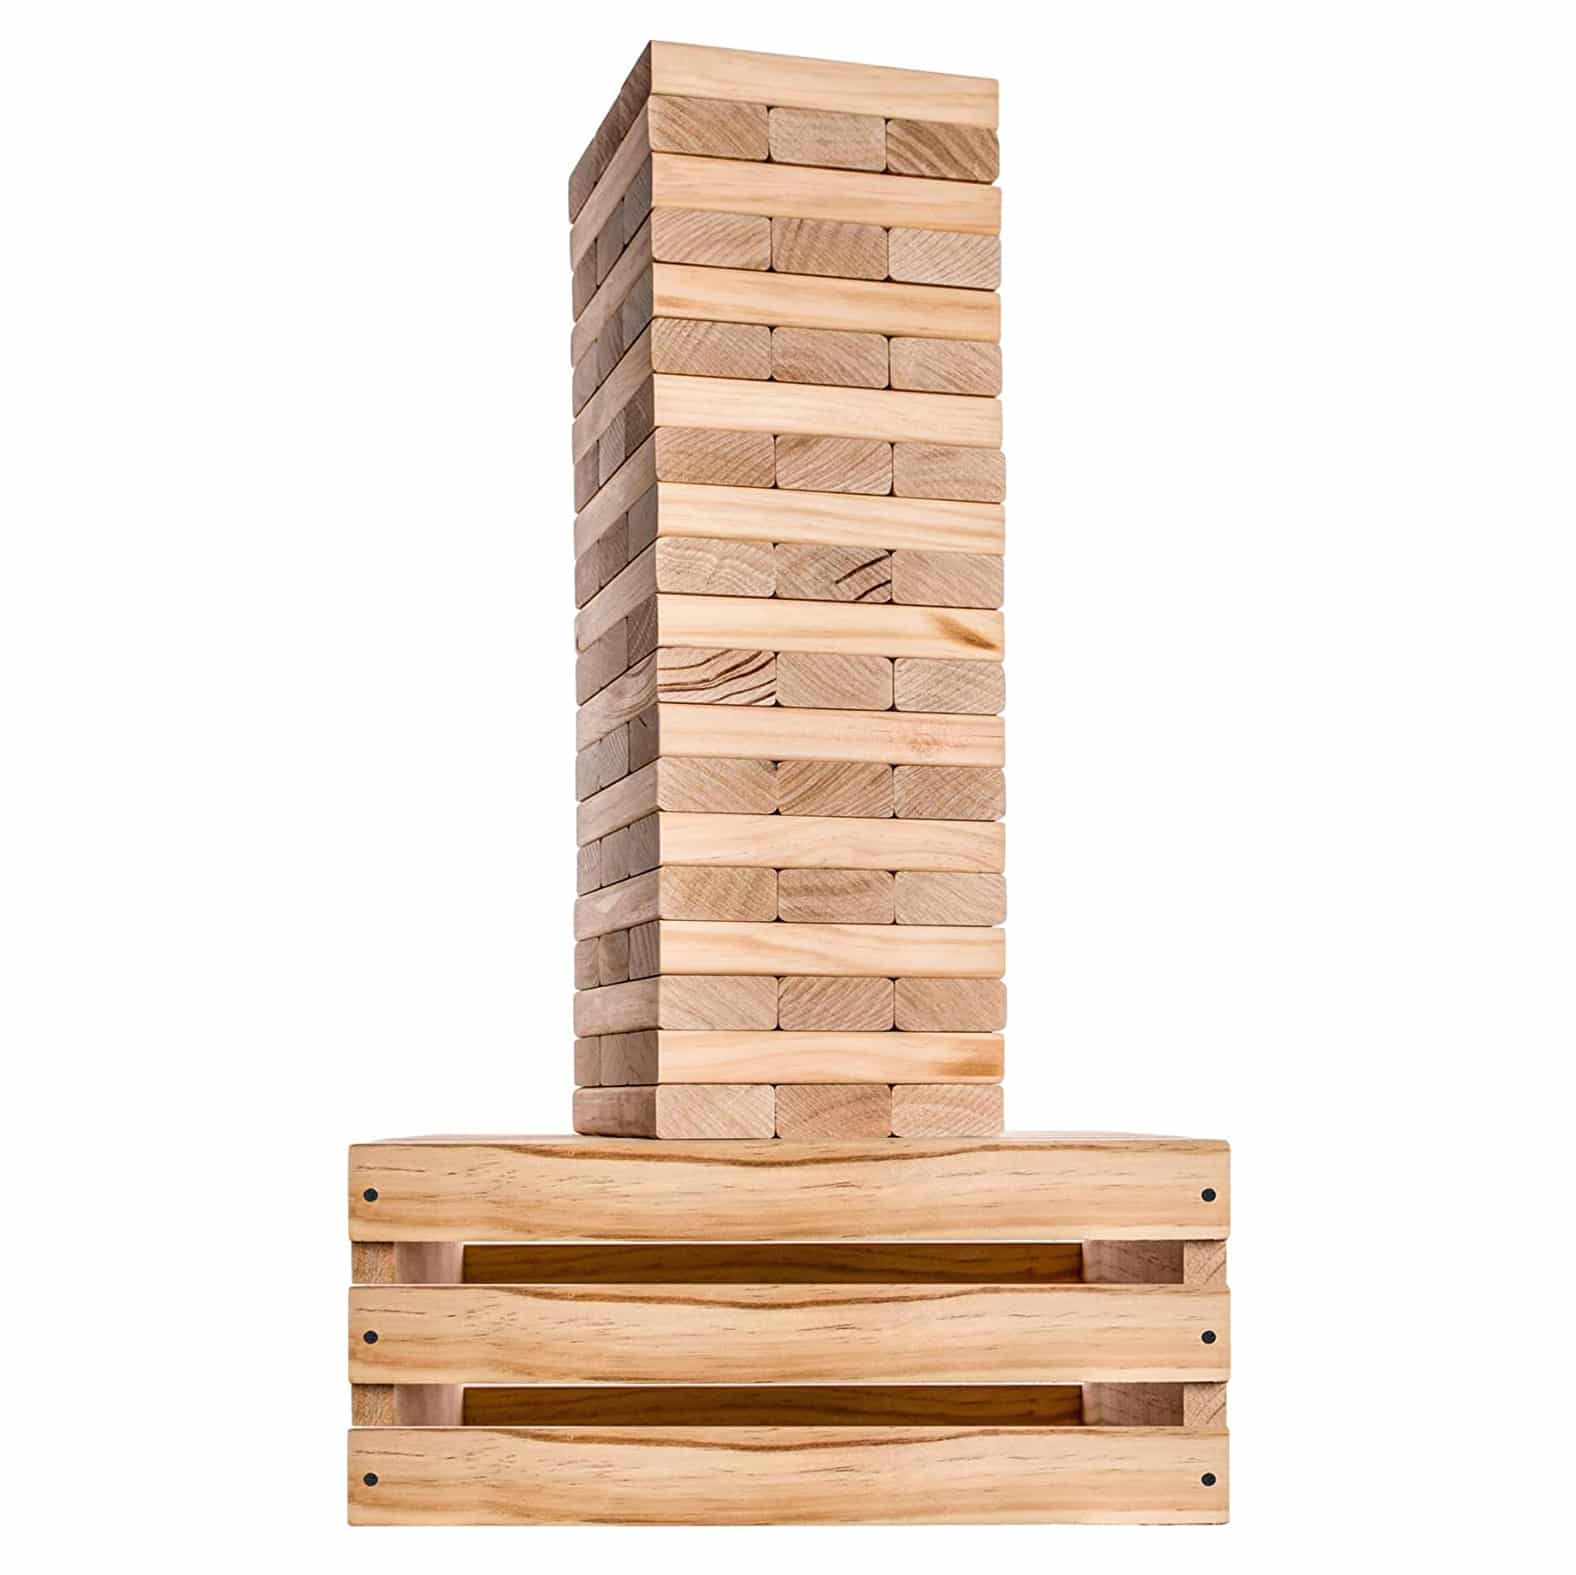 Splinter Woodworking Co. Giant Tower Game